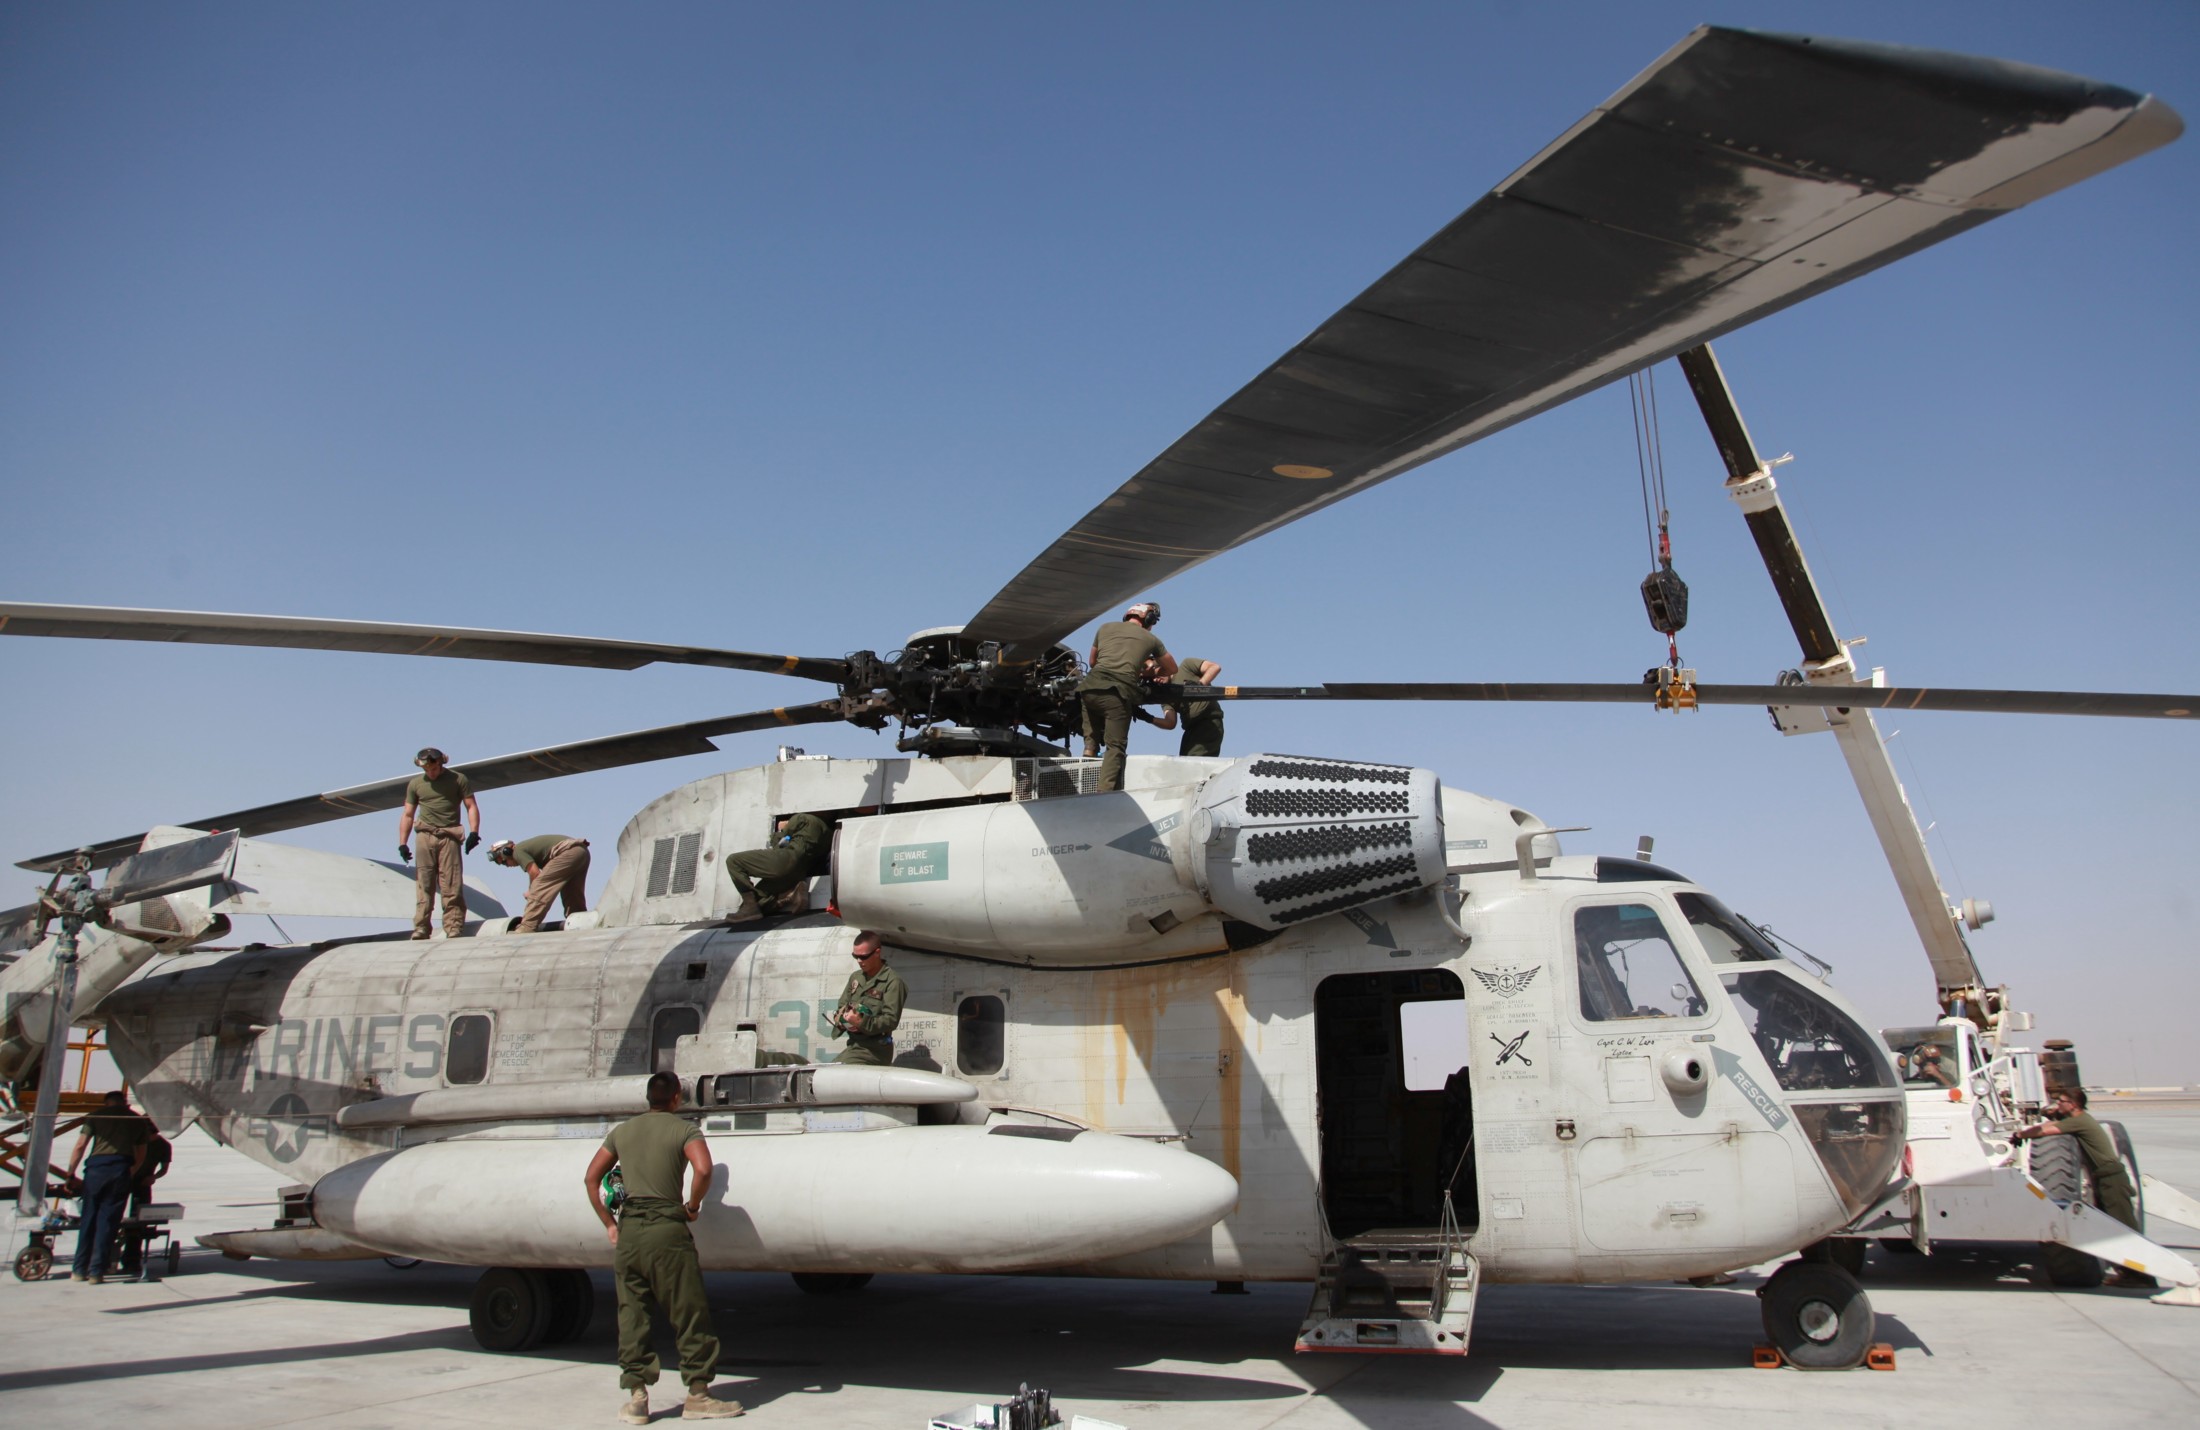 hmh-362 ugly angels marine heavy helicopter squadron usmc sikorsky ch-53d sea stallion 19 camp bastion afghanistan